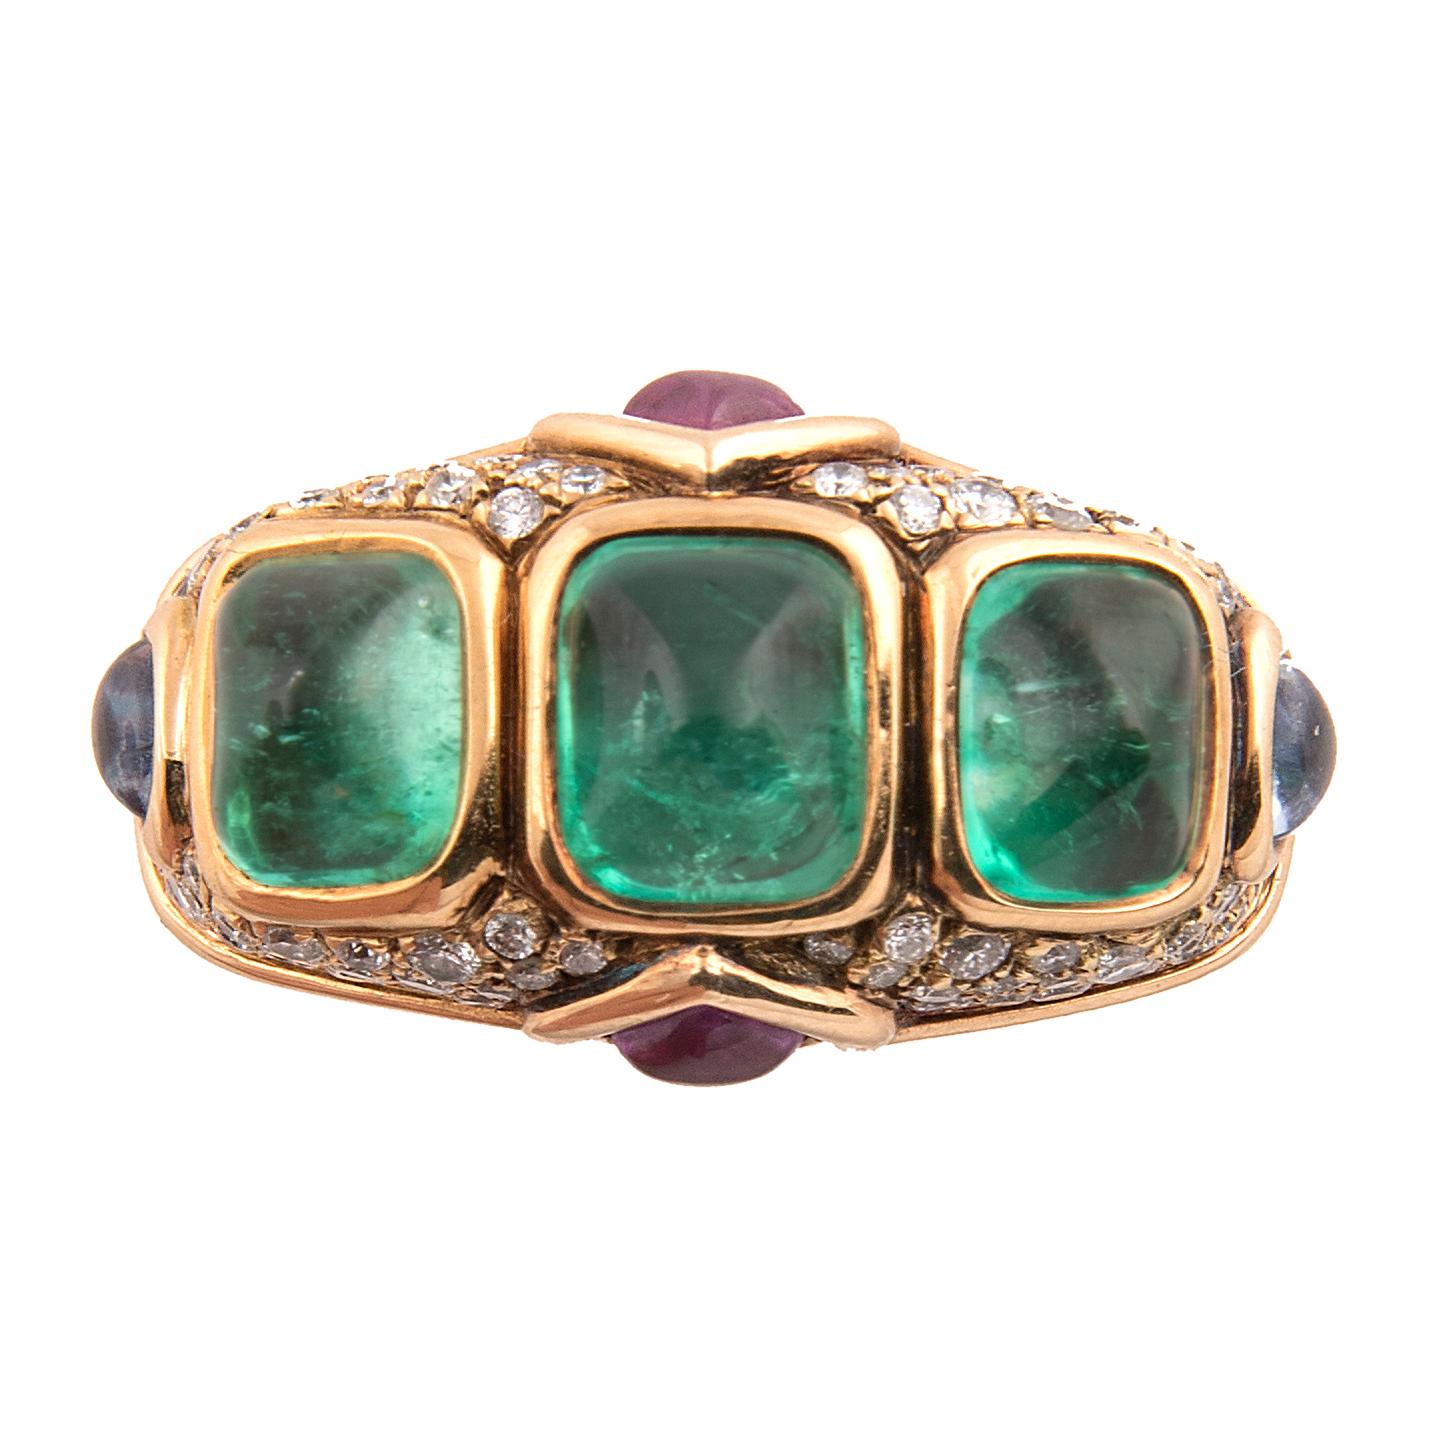 Impressive ring by Marina B (Bulgari), 18k yellow gold set with three Emeralds in line, all around decorated with pavé set diamonds heightened with tourmaline and Russian quartz
Signed Marina B, stamped 750 and numbered P1651
Ring size EU: 52, US: